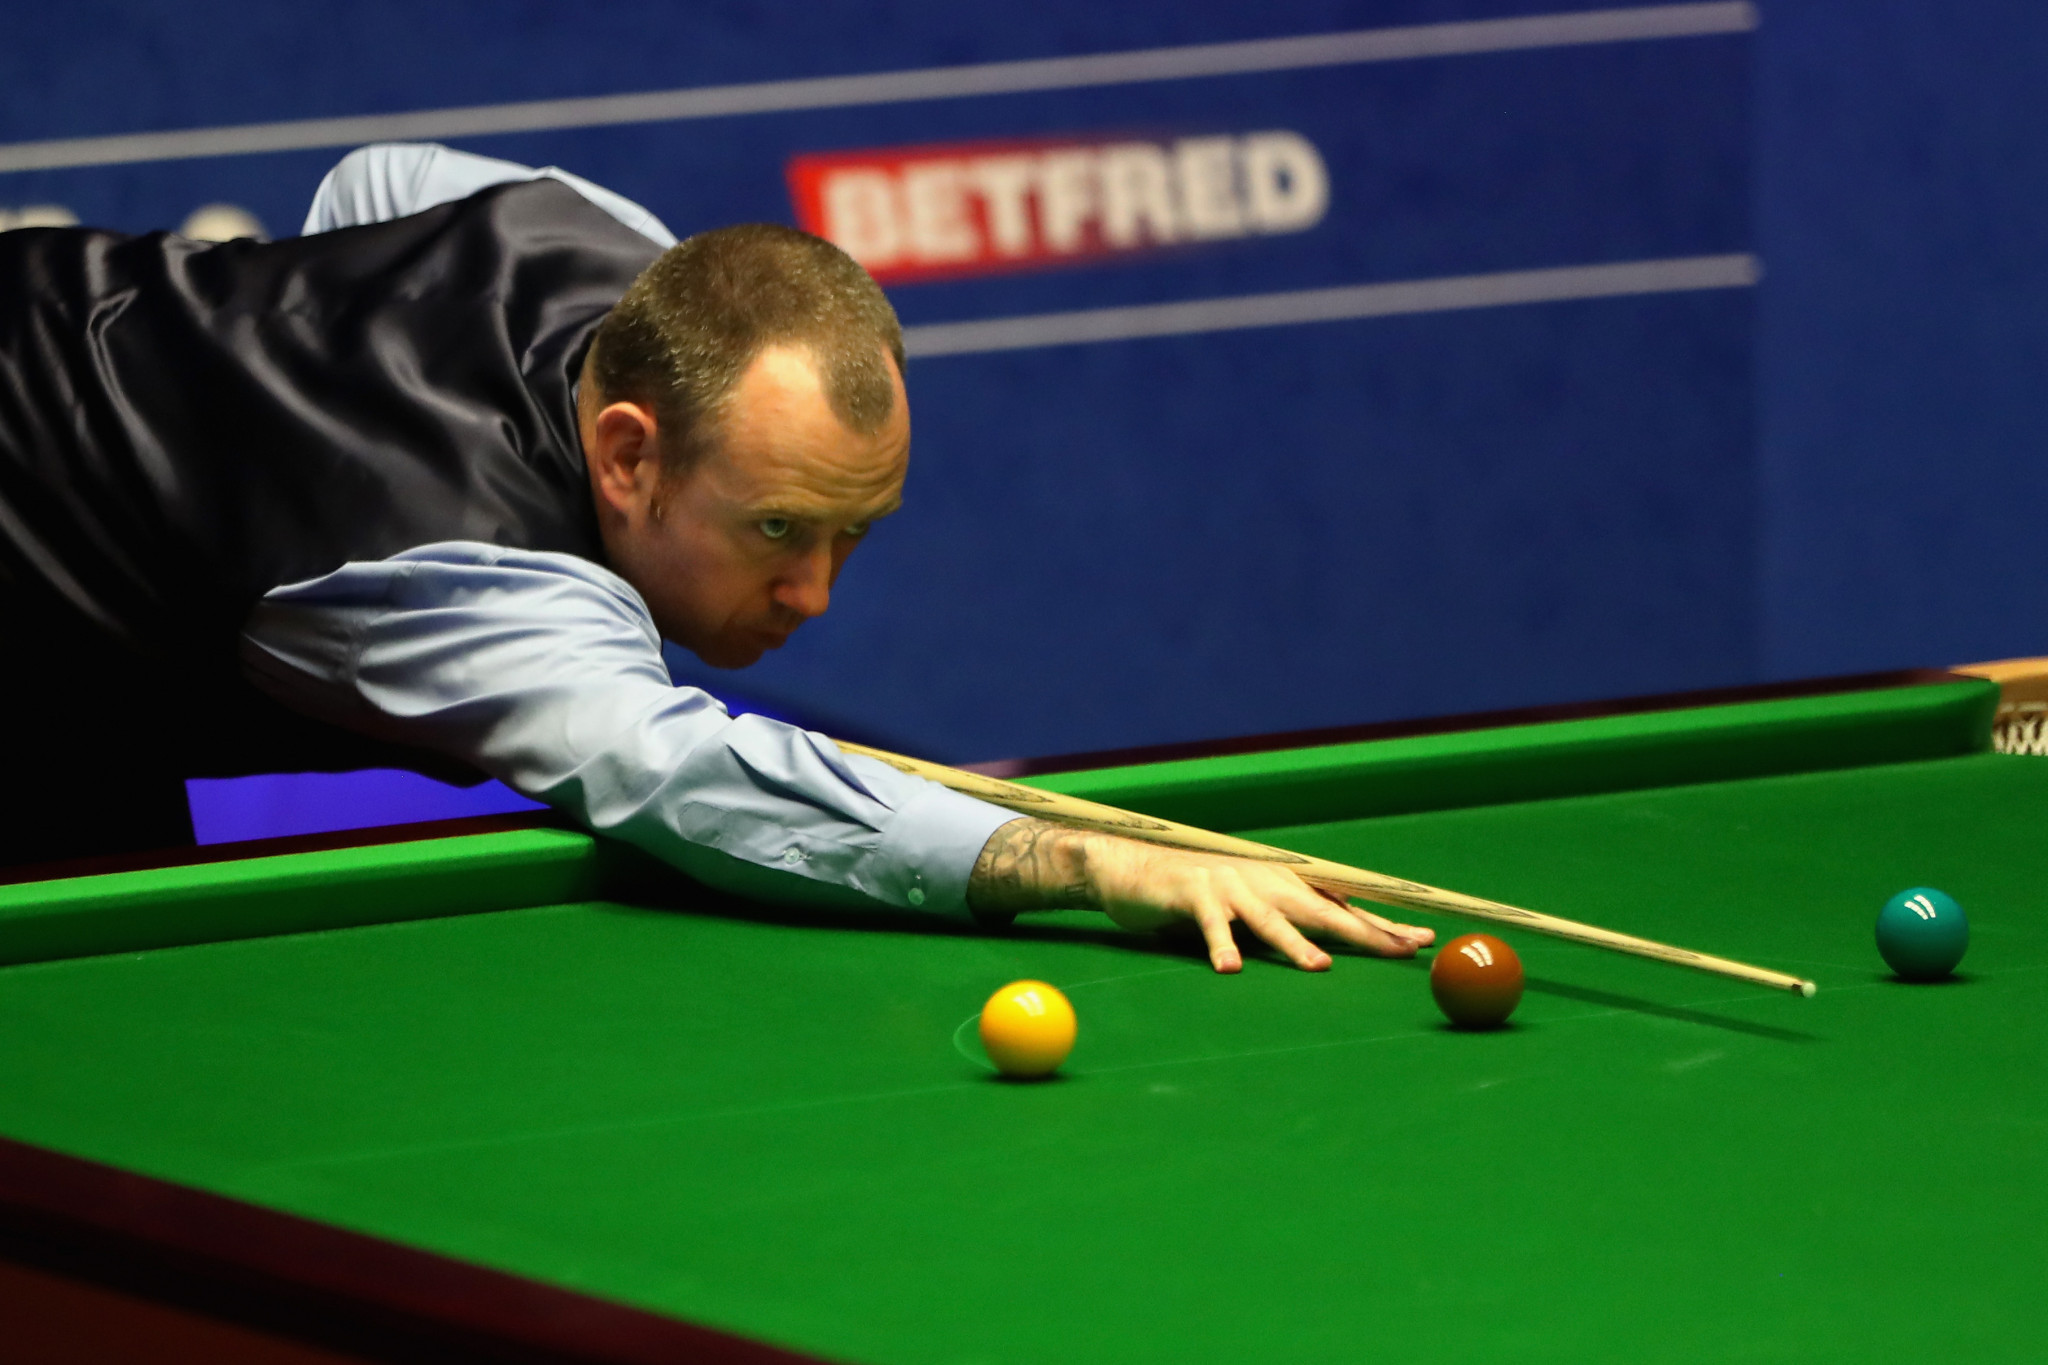 Reigning champion Williams in hospital with chest pains after opening session of second-round World Snooker Championship match